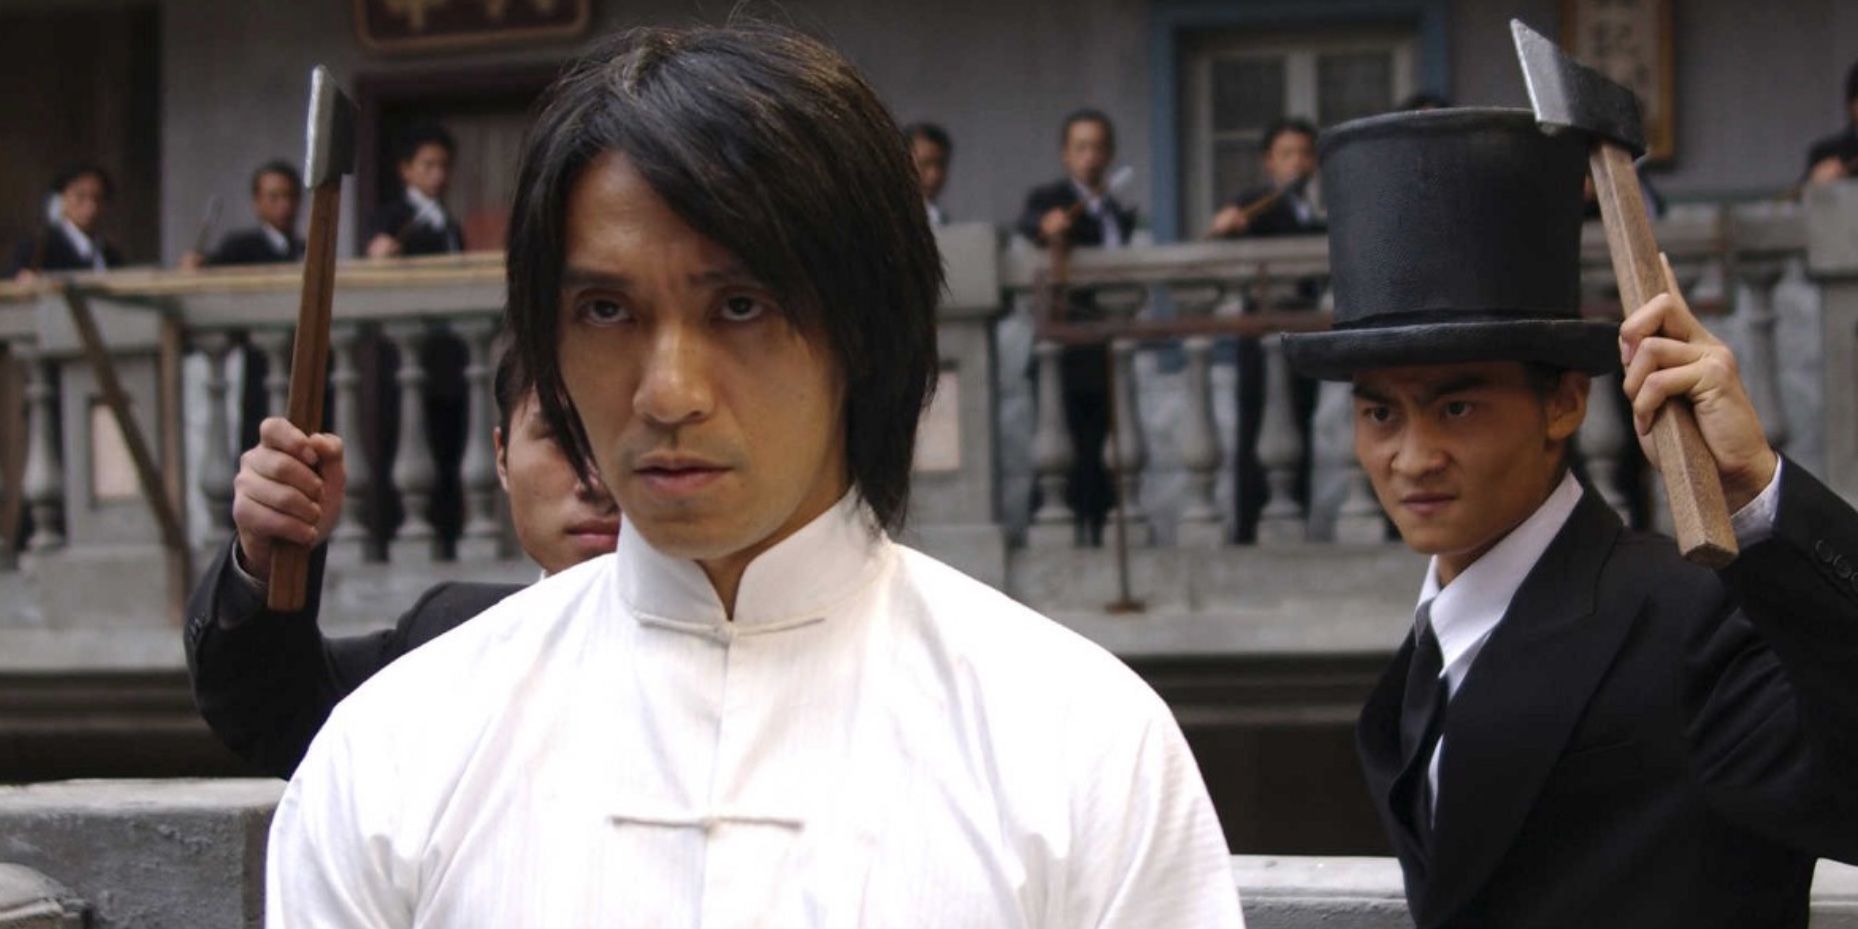 Stephen Chow and two other men standing behind him with axes in 'Kung Fu Hustle'